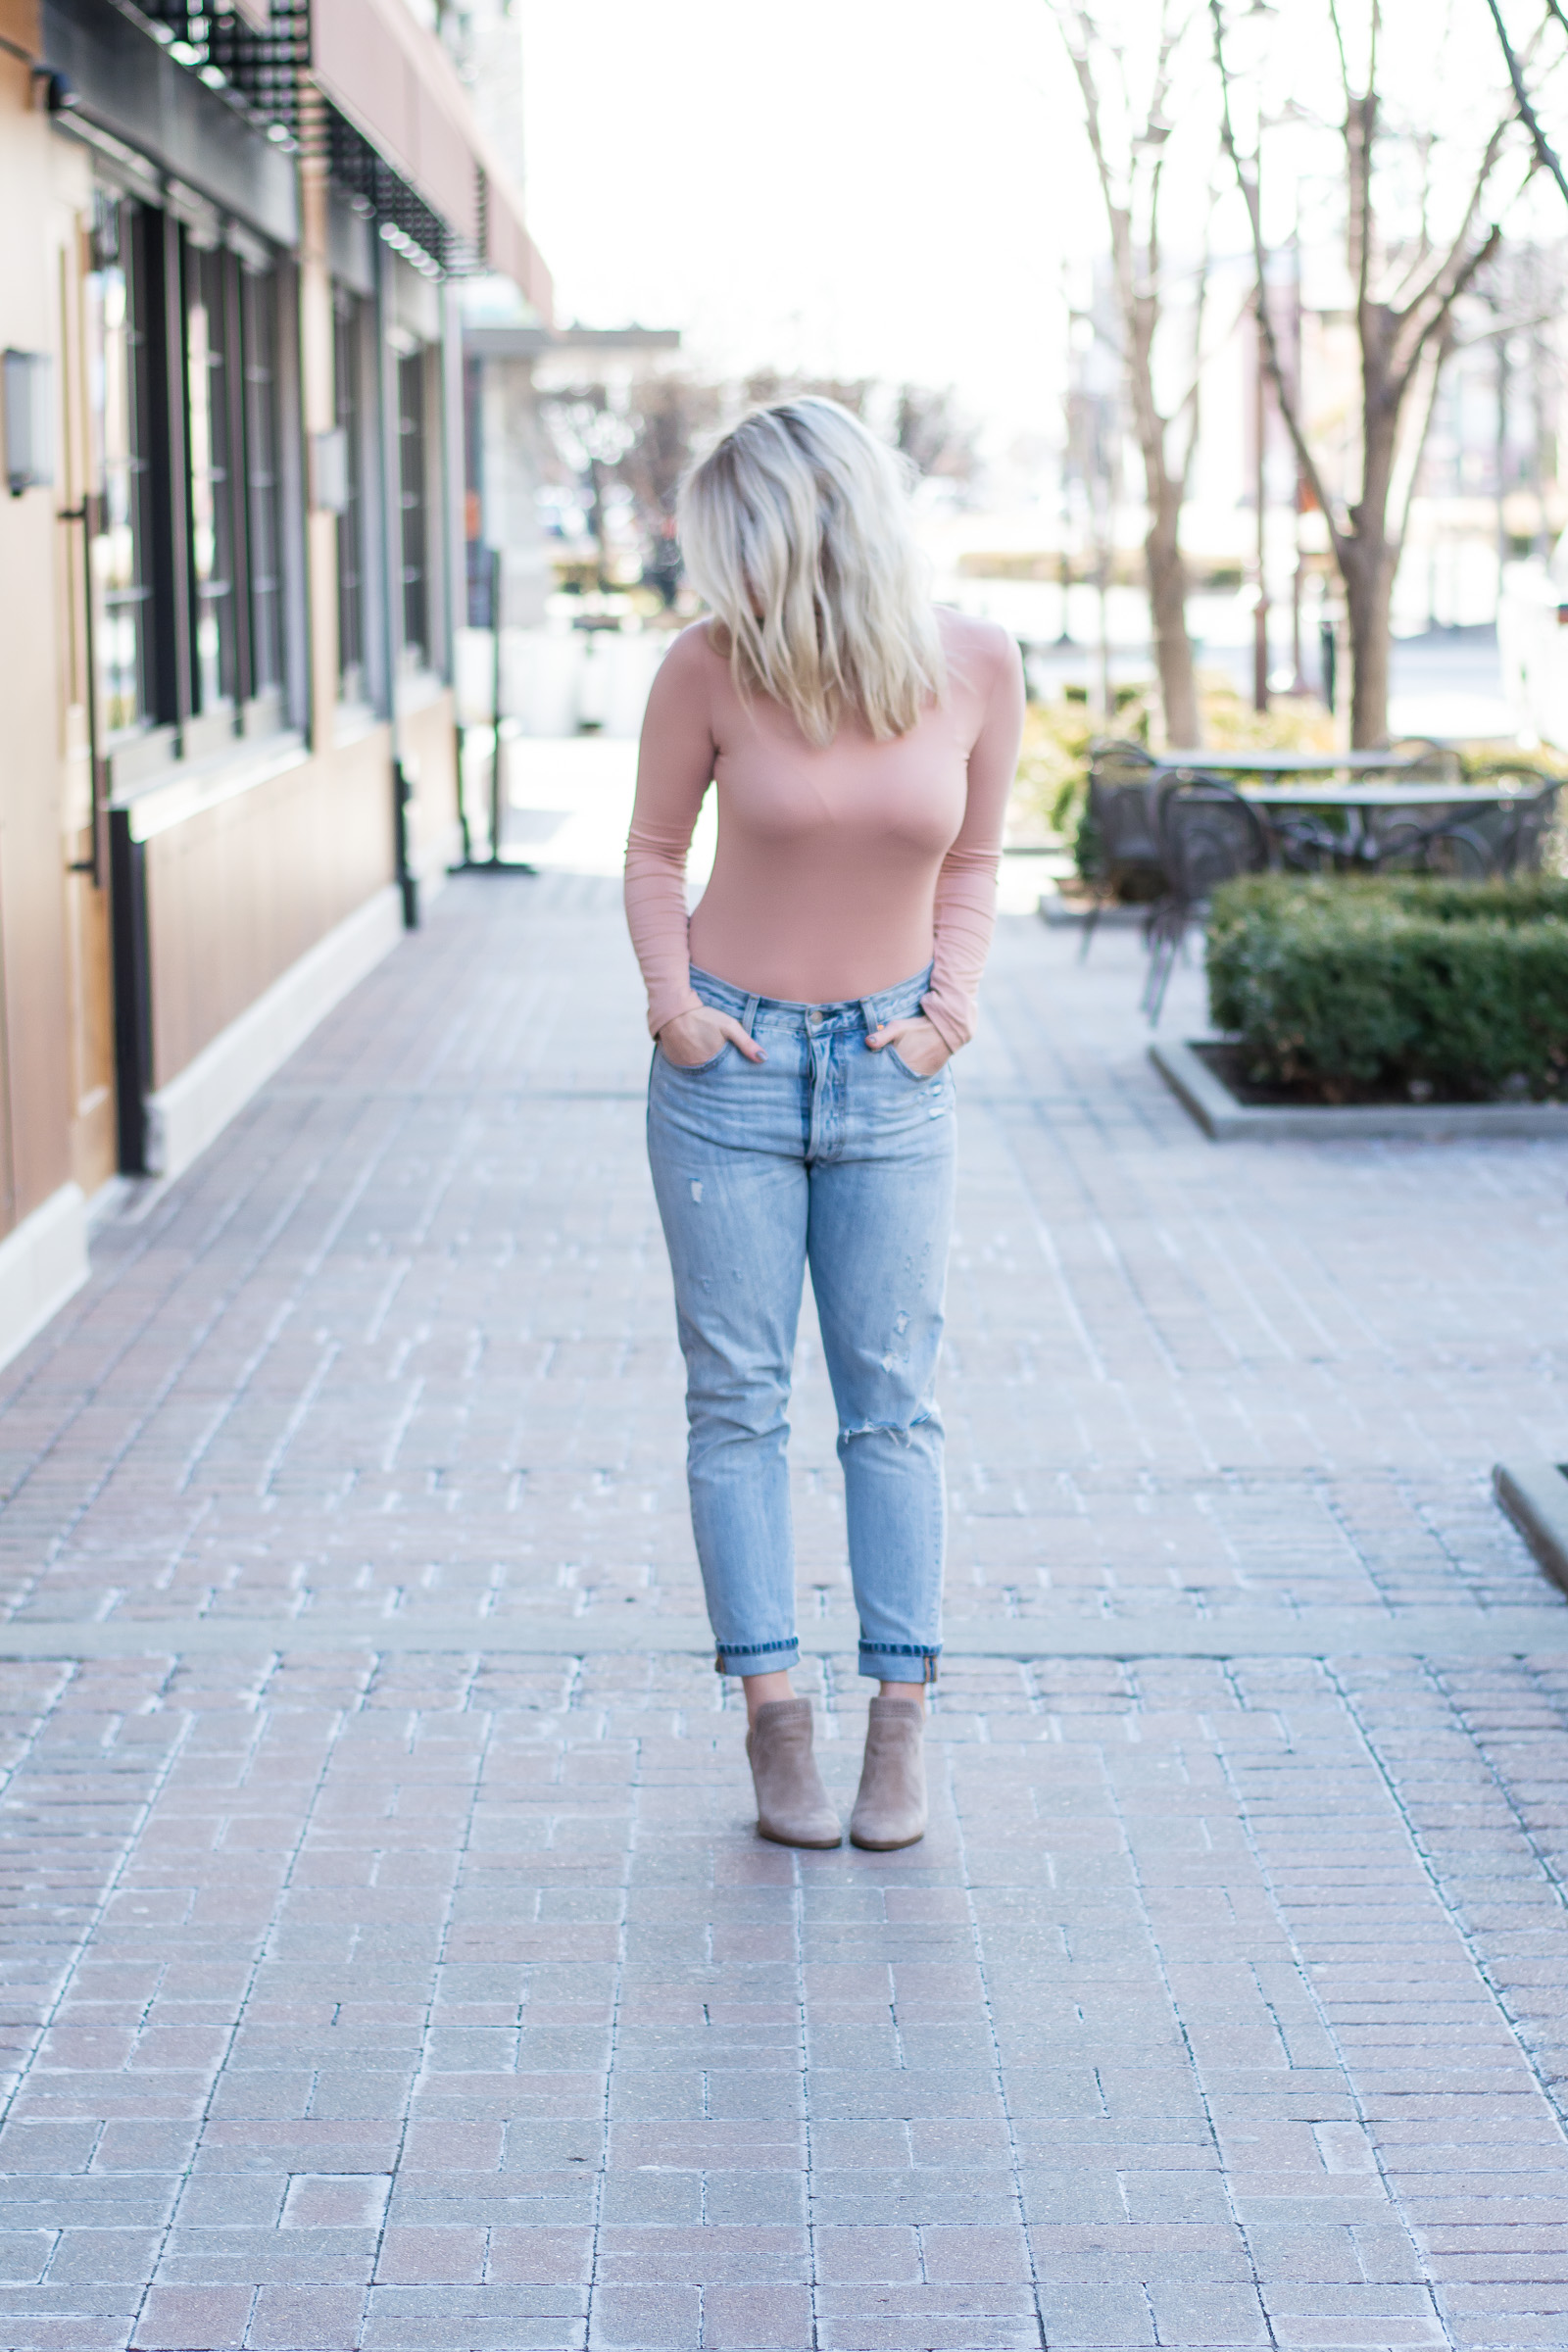 Spring Transition Outfit: Blush Turtleneck + Levi's 501s. | Ashley from LSR